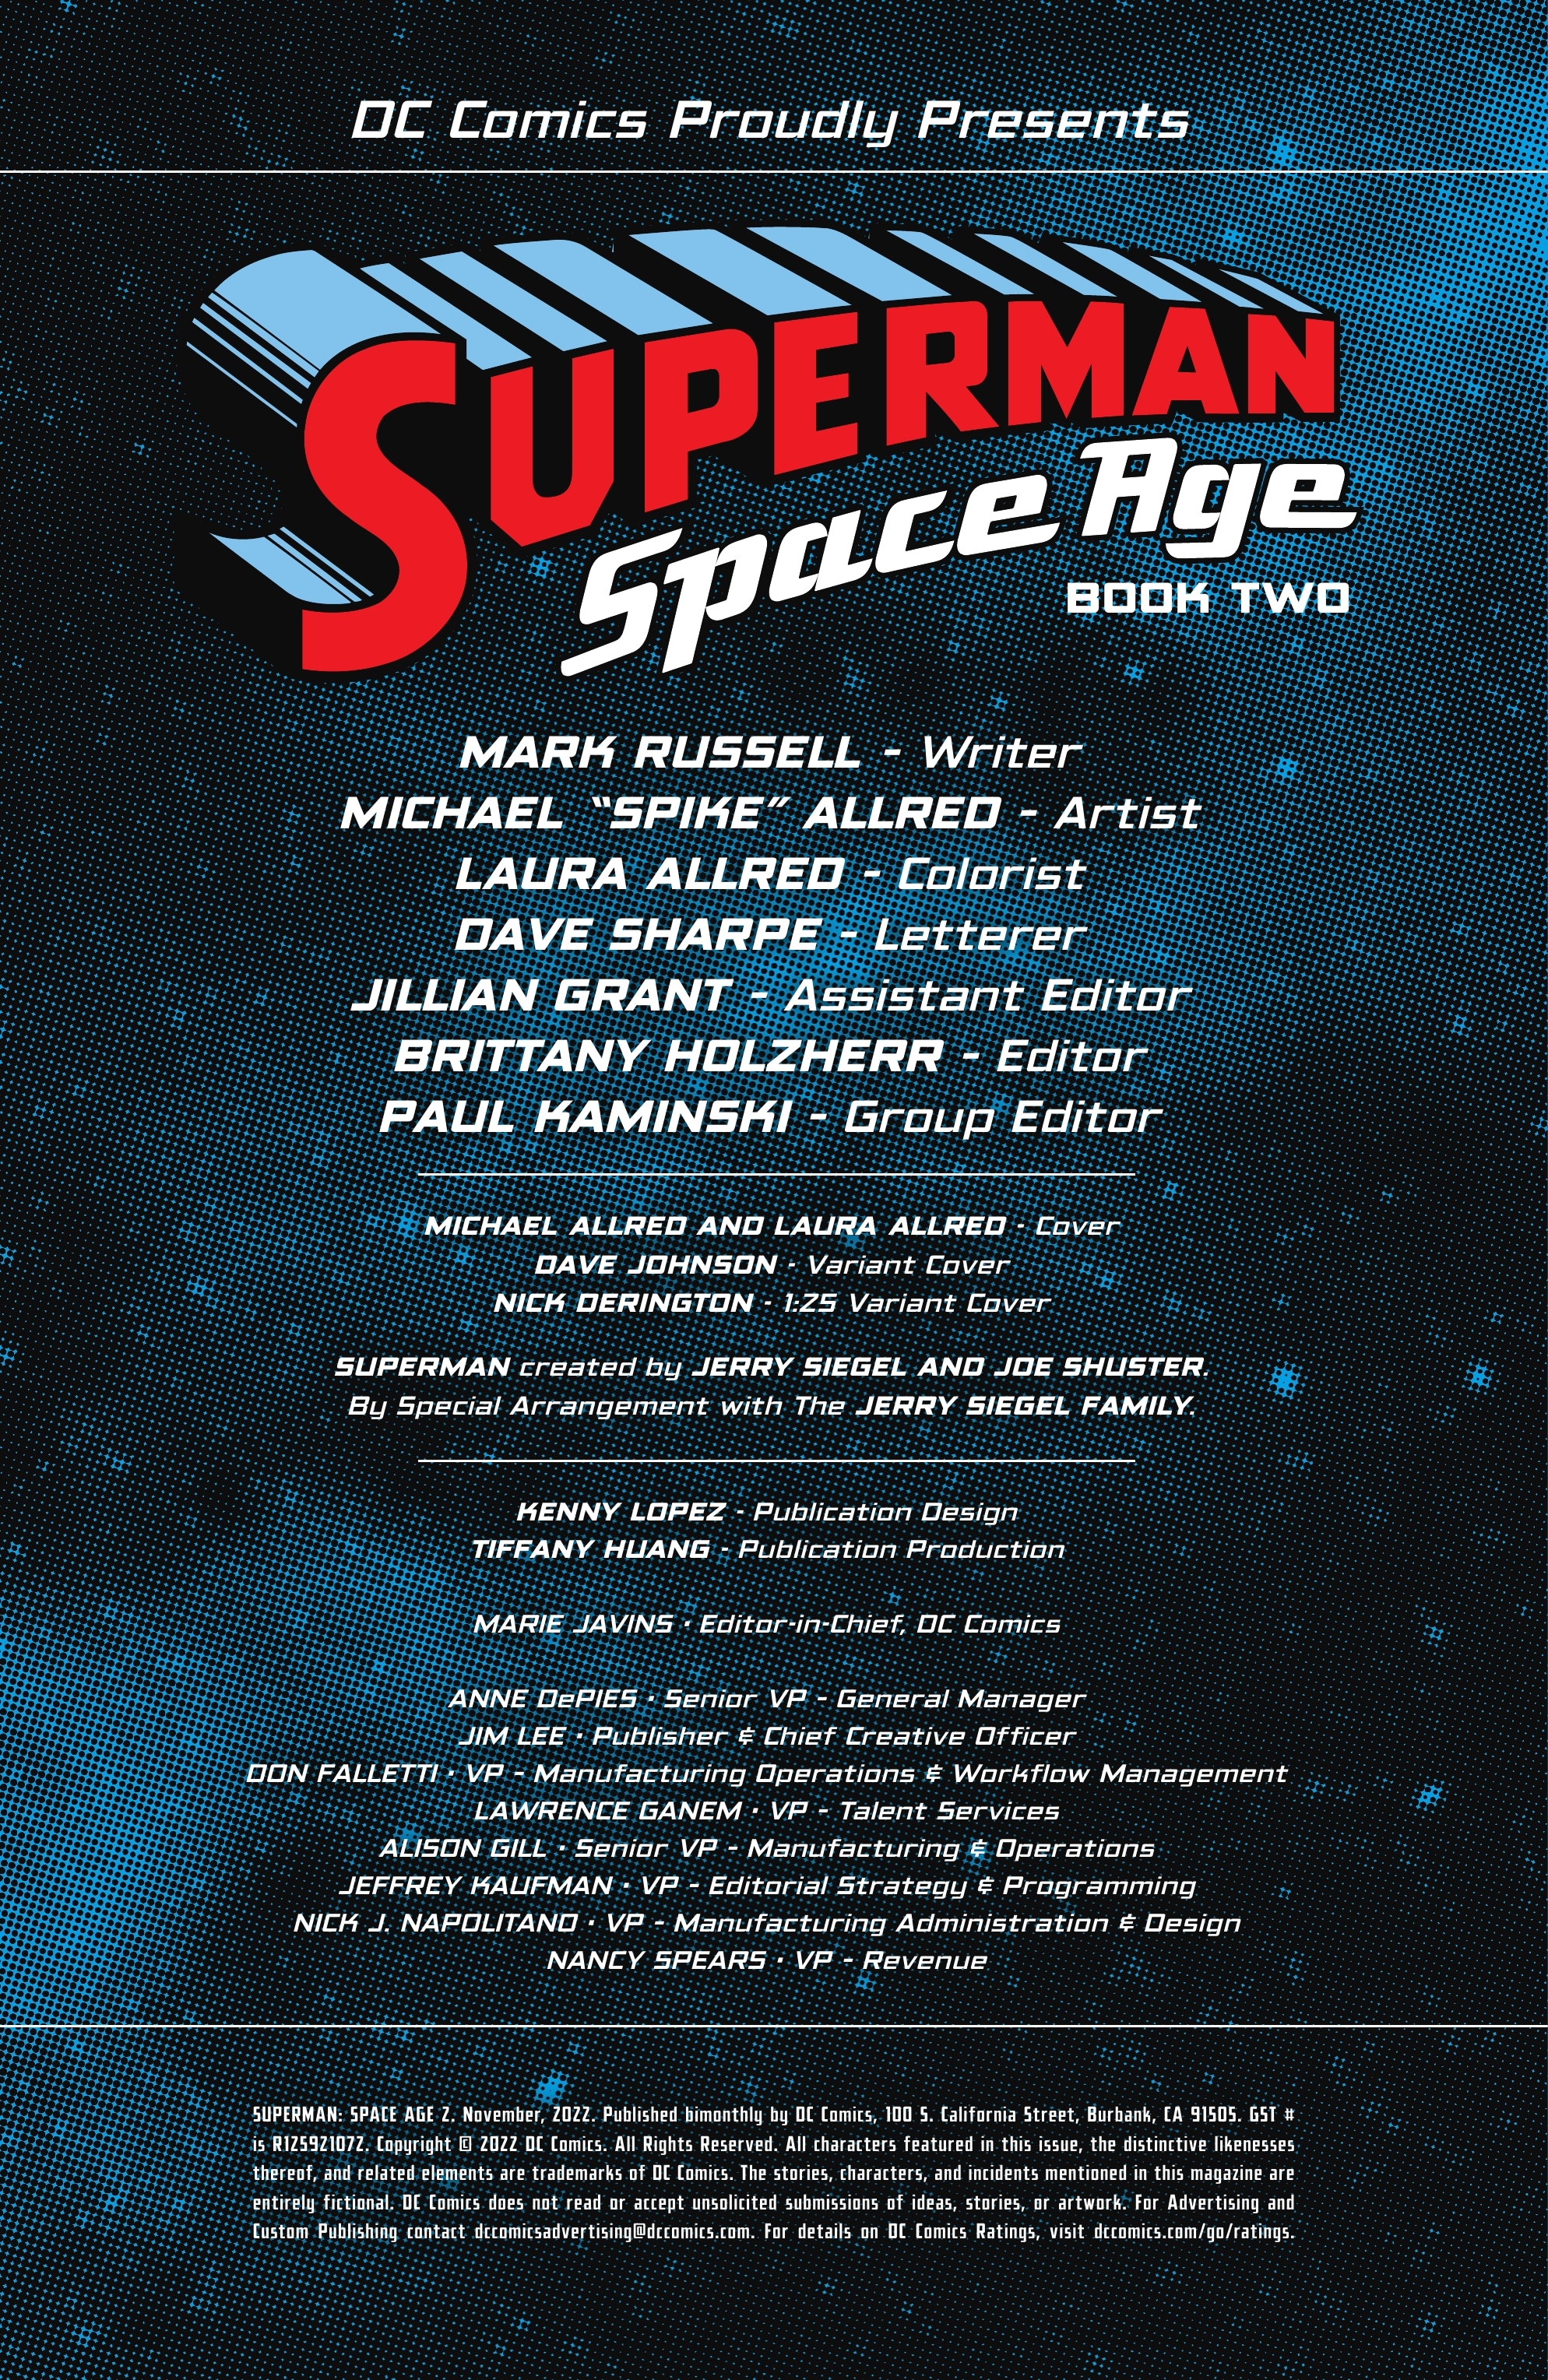 Read online Superman: Space Age comic -  Issue # TPB 2 - 2